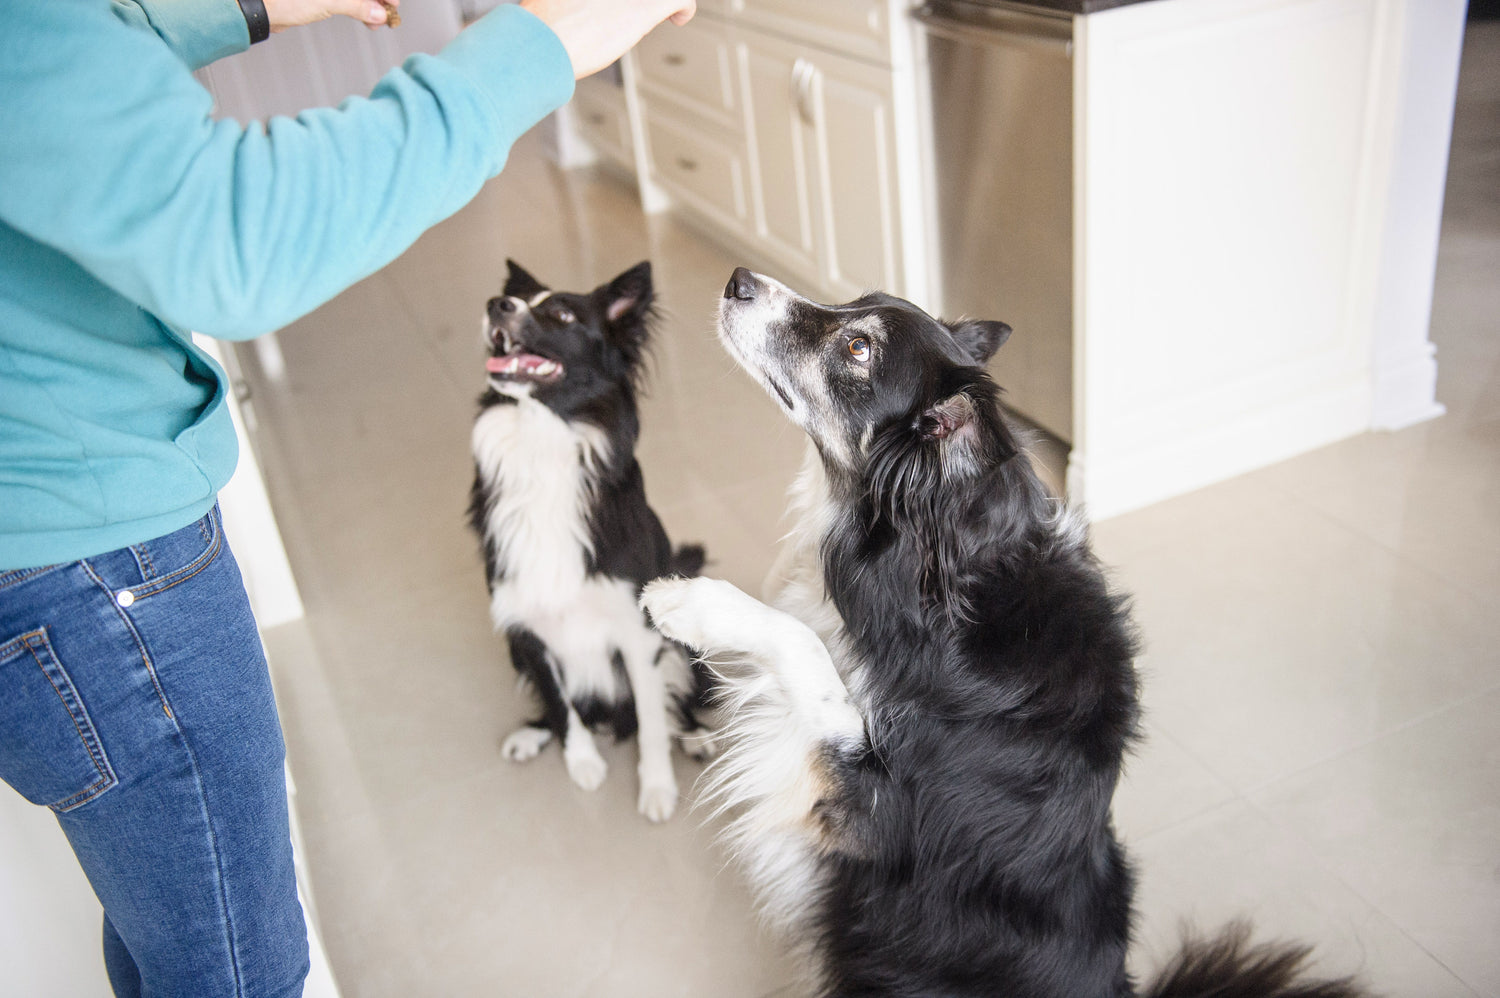 HOW TO REWARD OUR DOGS INTELLIGENTLY?